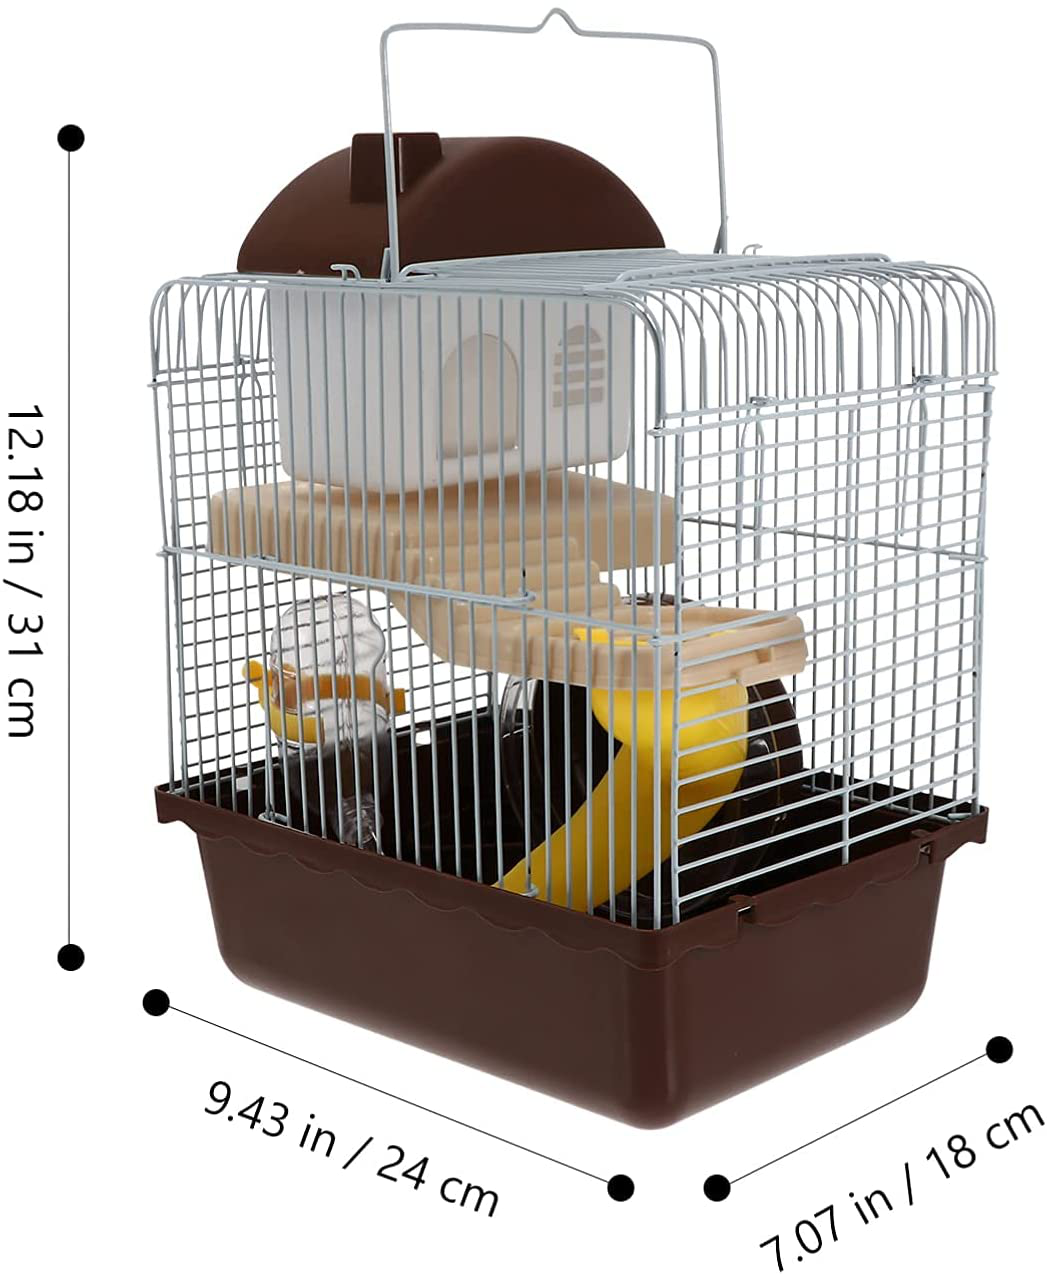 STOBOK Hamster Cage Portable Double Layer Wire Habitat Small Animal Critter House Cage Pet Playpen Activity Exercise Centre for Rodent Gerbil Mouse Mice Rat Accessories Coffee